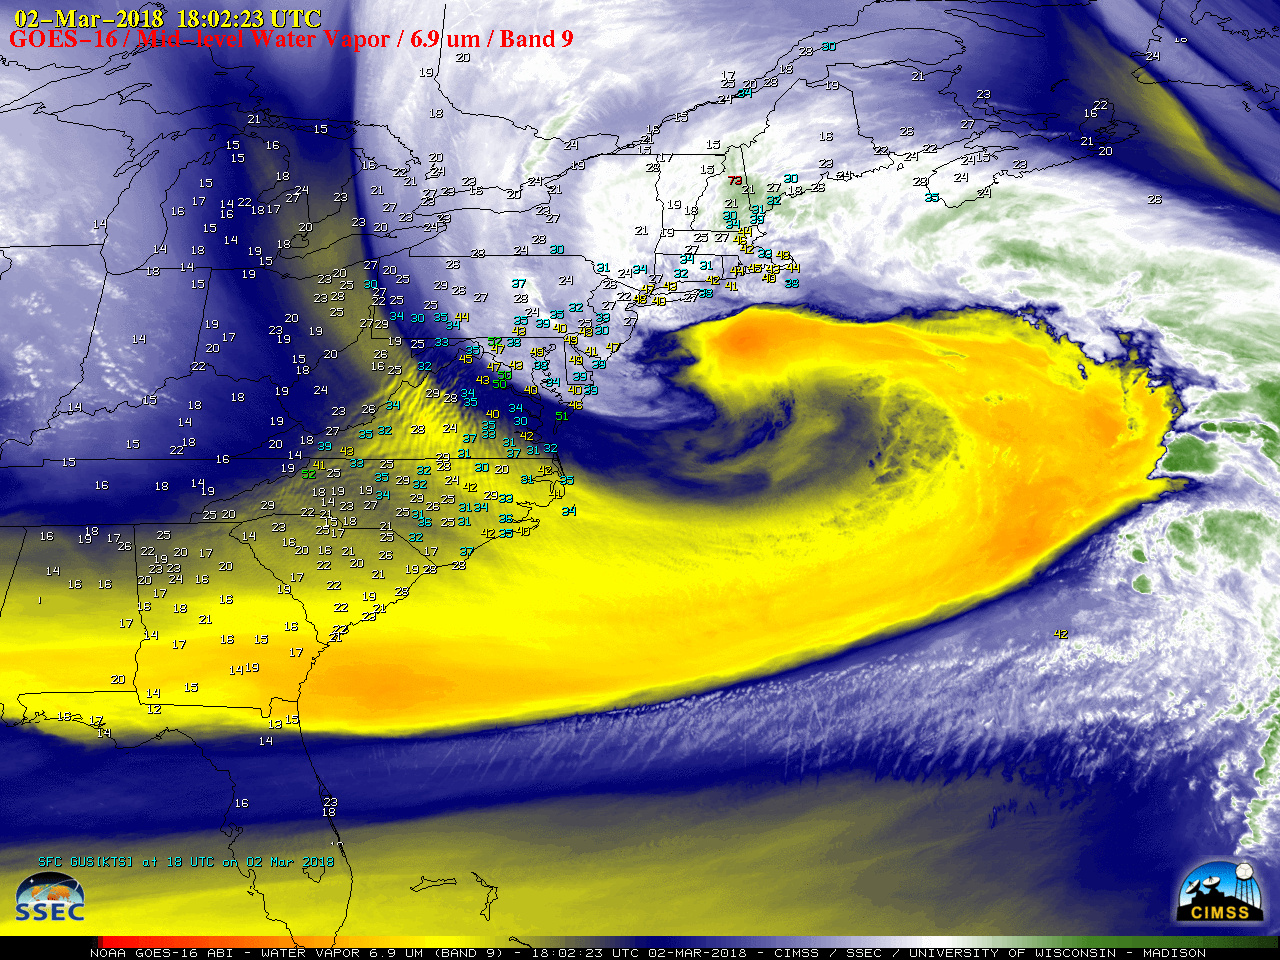 GOES-16 Mid-level (6.9 µm) images, with plots of hourly wind gusts [click to play MP4 animation]